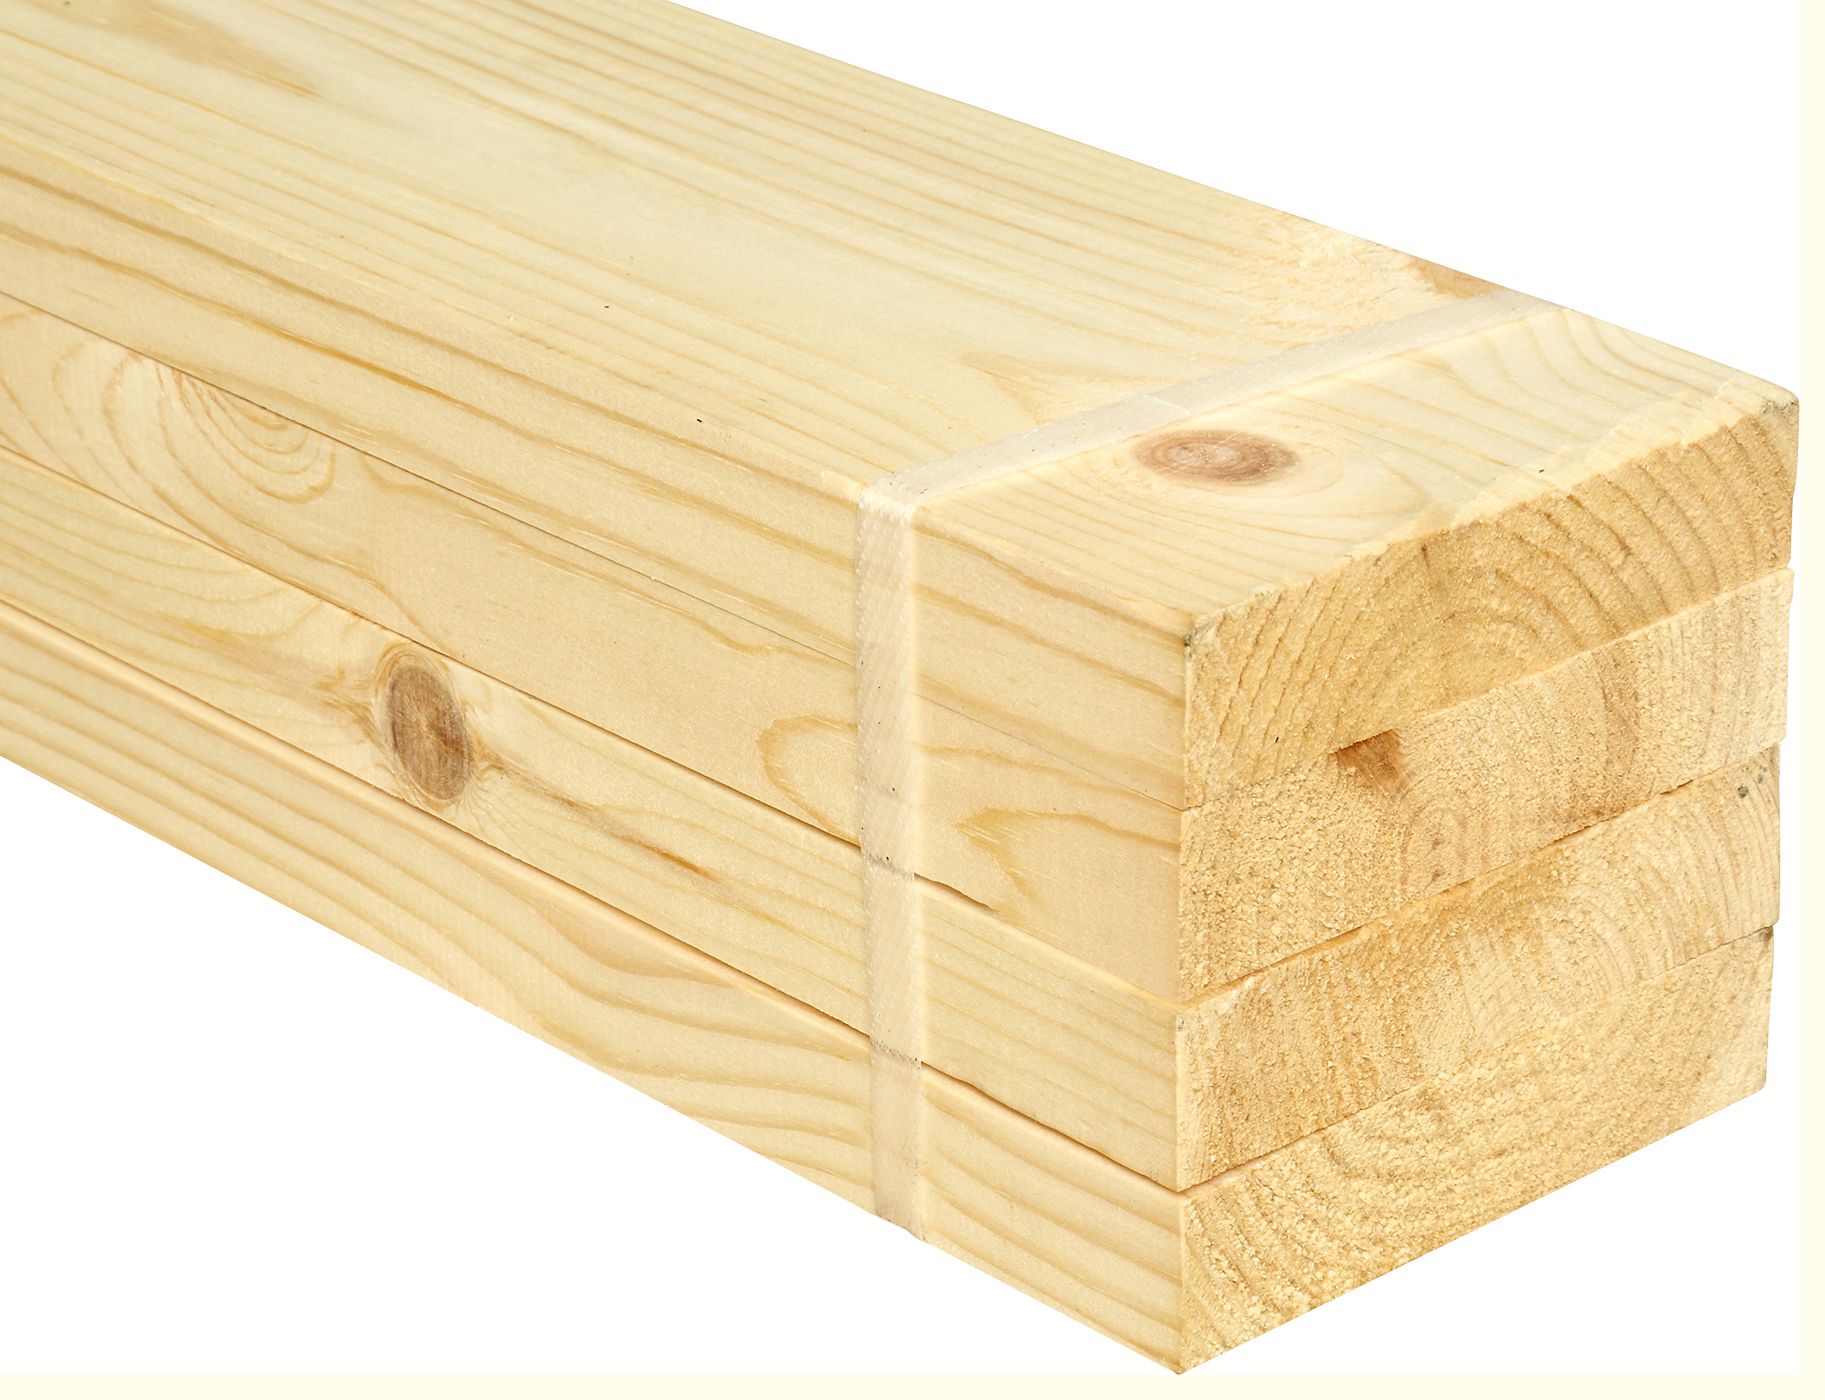 Image of Wickes Redwood PSE Timber - 20.5 x 94 x 2400mm - Pack of 4